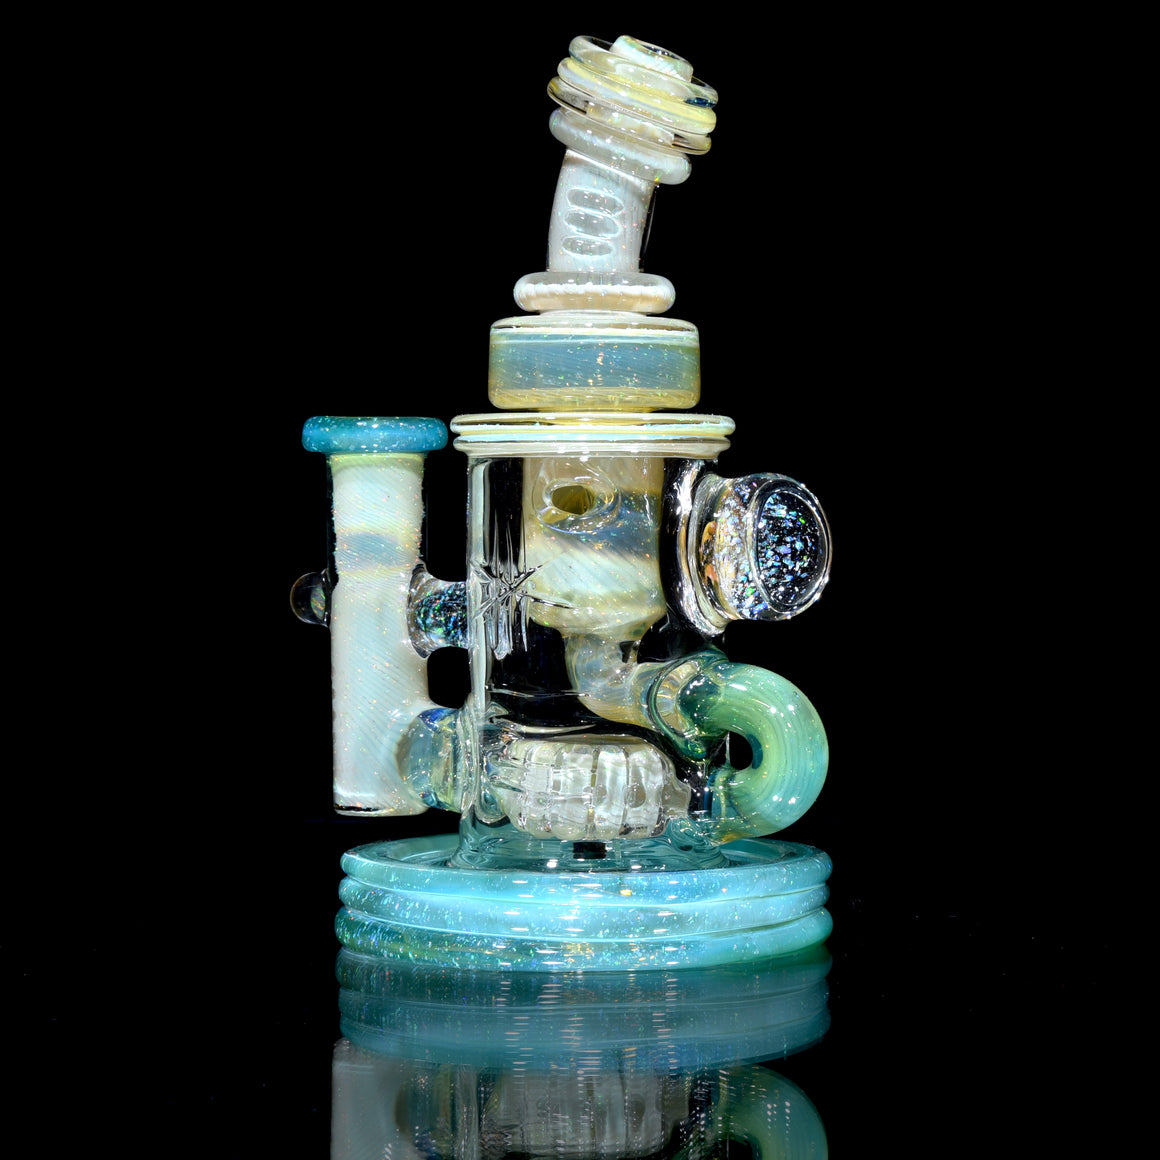 Carved Crushed Opal Mini Klein Recycler - Plantphibian/Green Energy - 10mm Female